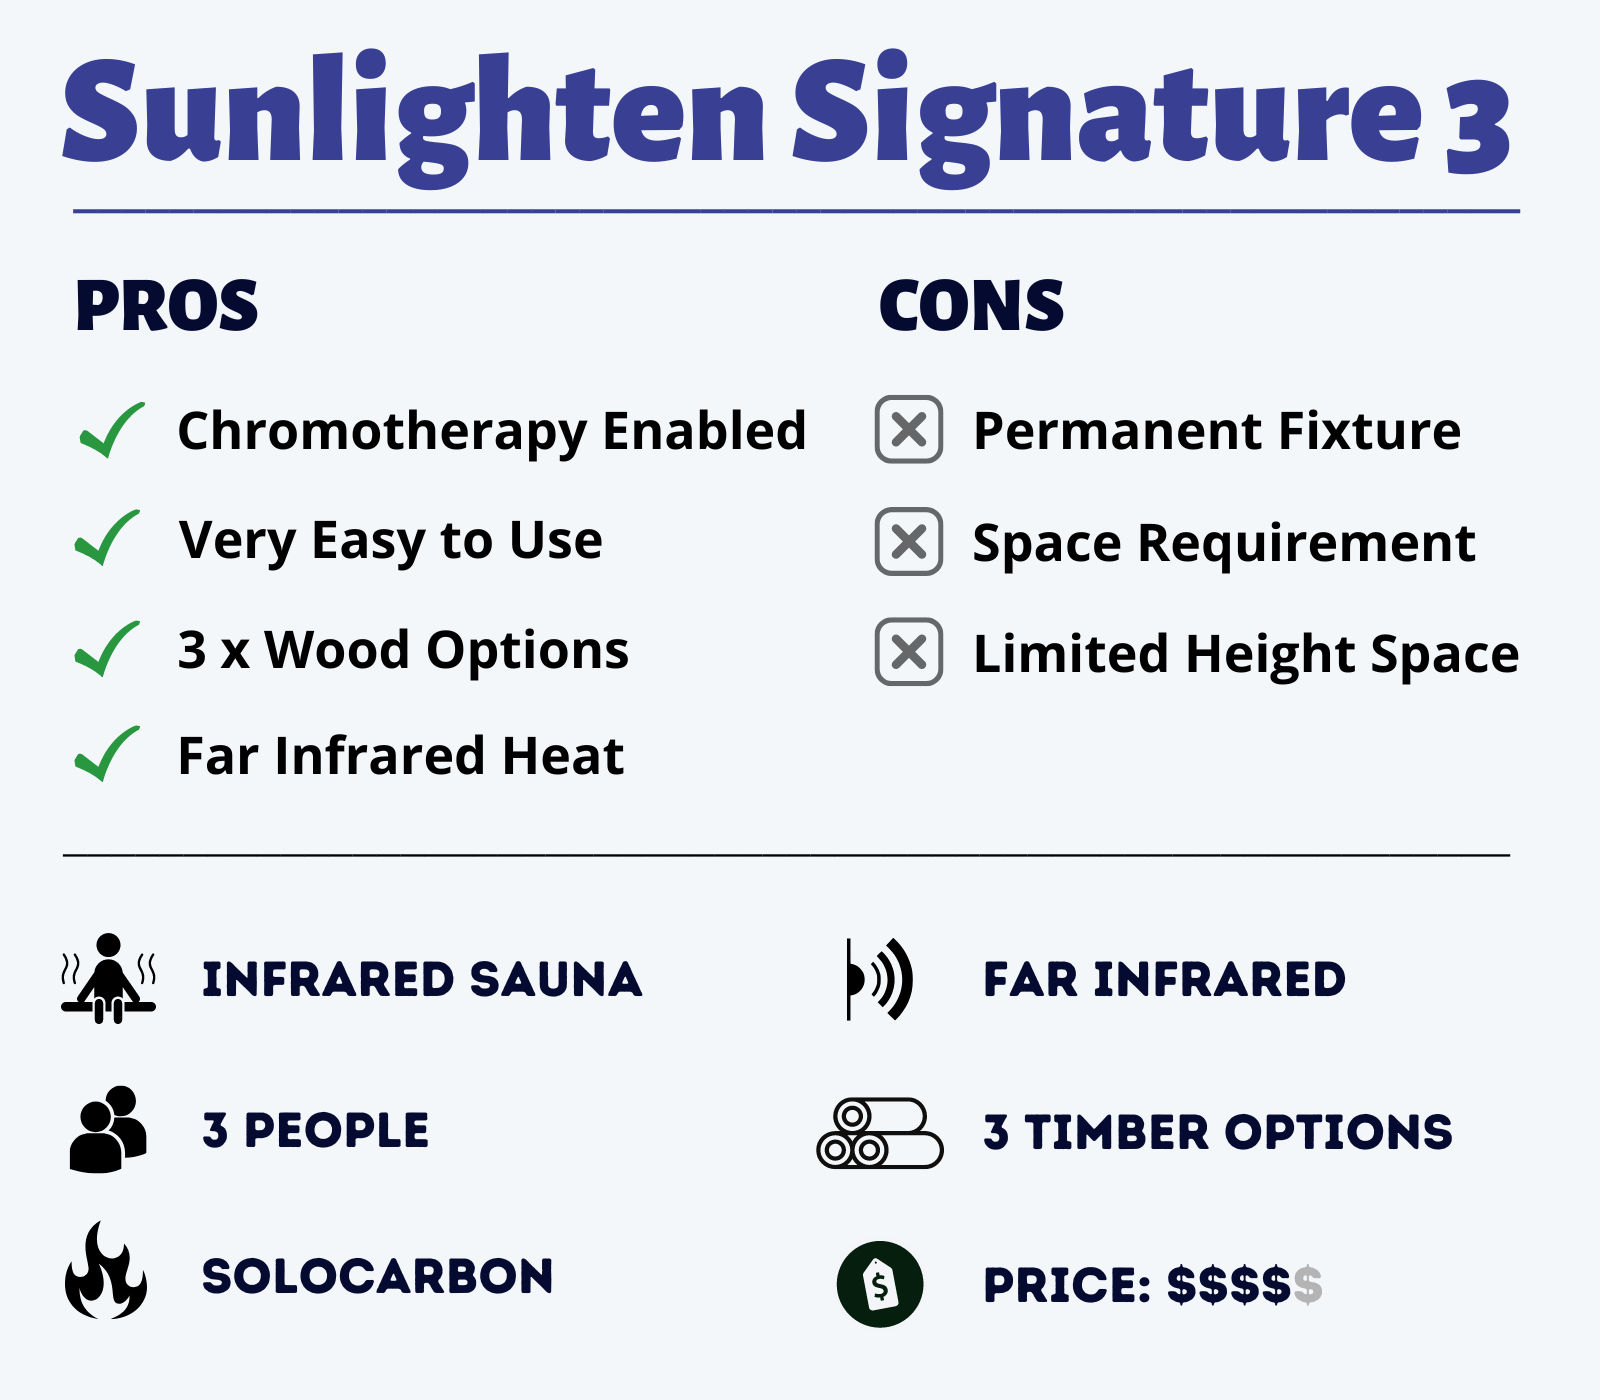 Sunlighten Signature 3 features overview pros and cons